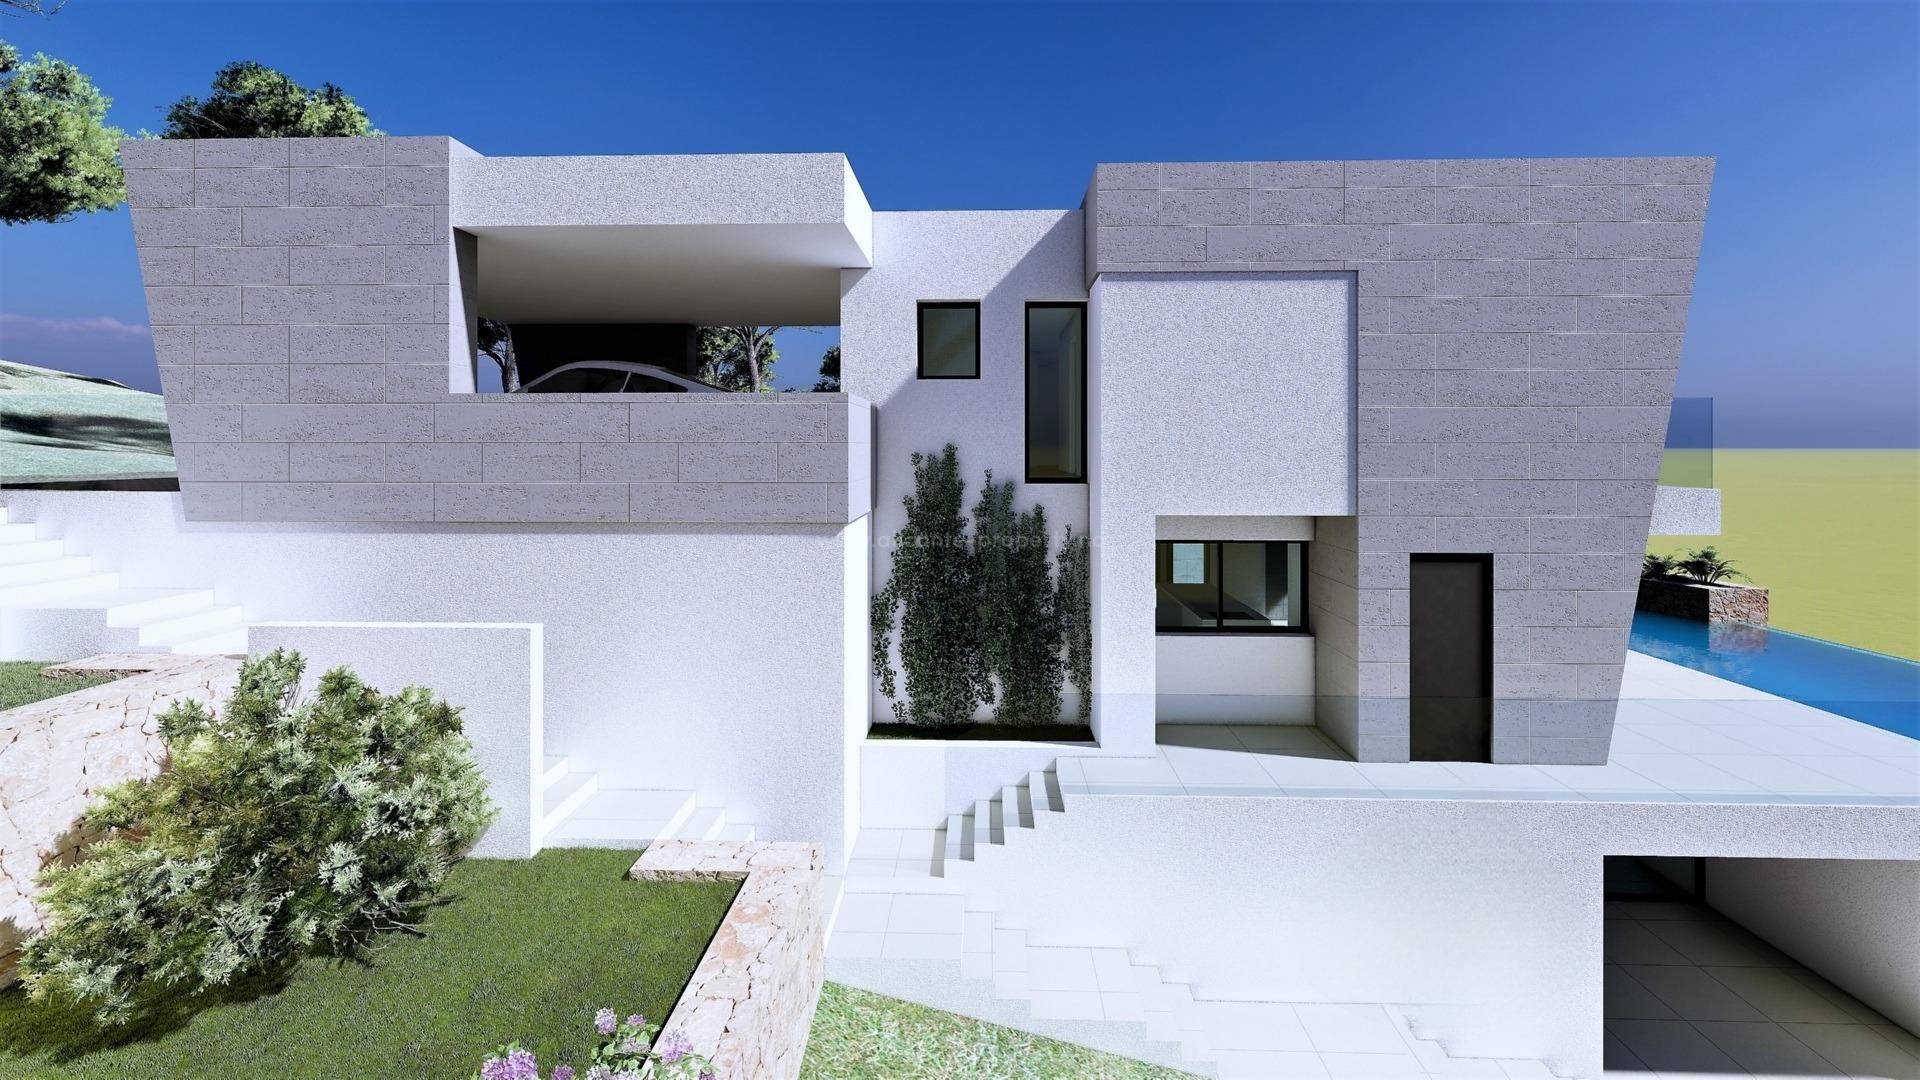 Modern luxury villa in Cumbre del Sol, Benitachell on 3 floors, large infinity pool, 3 bedrooms, 4 bathrooms, one of the best sea views on the Costa Blanca